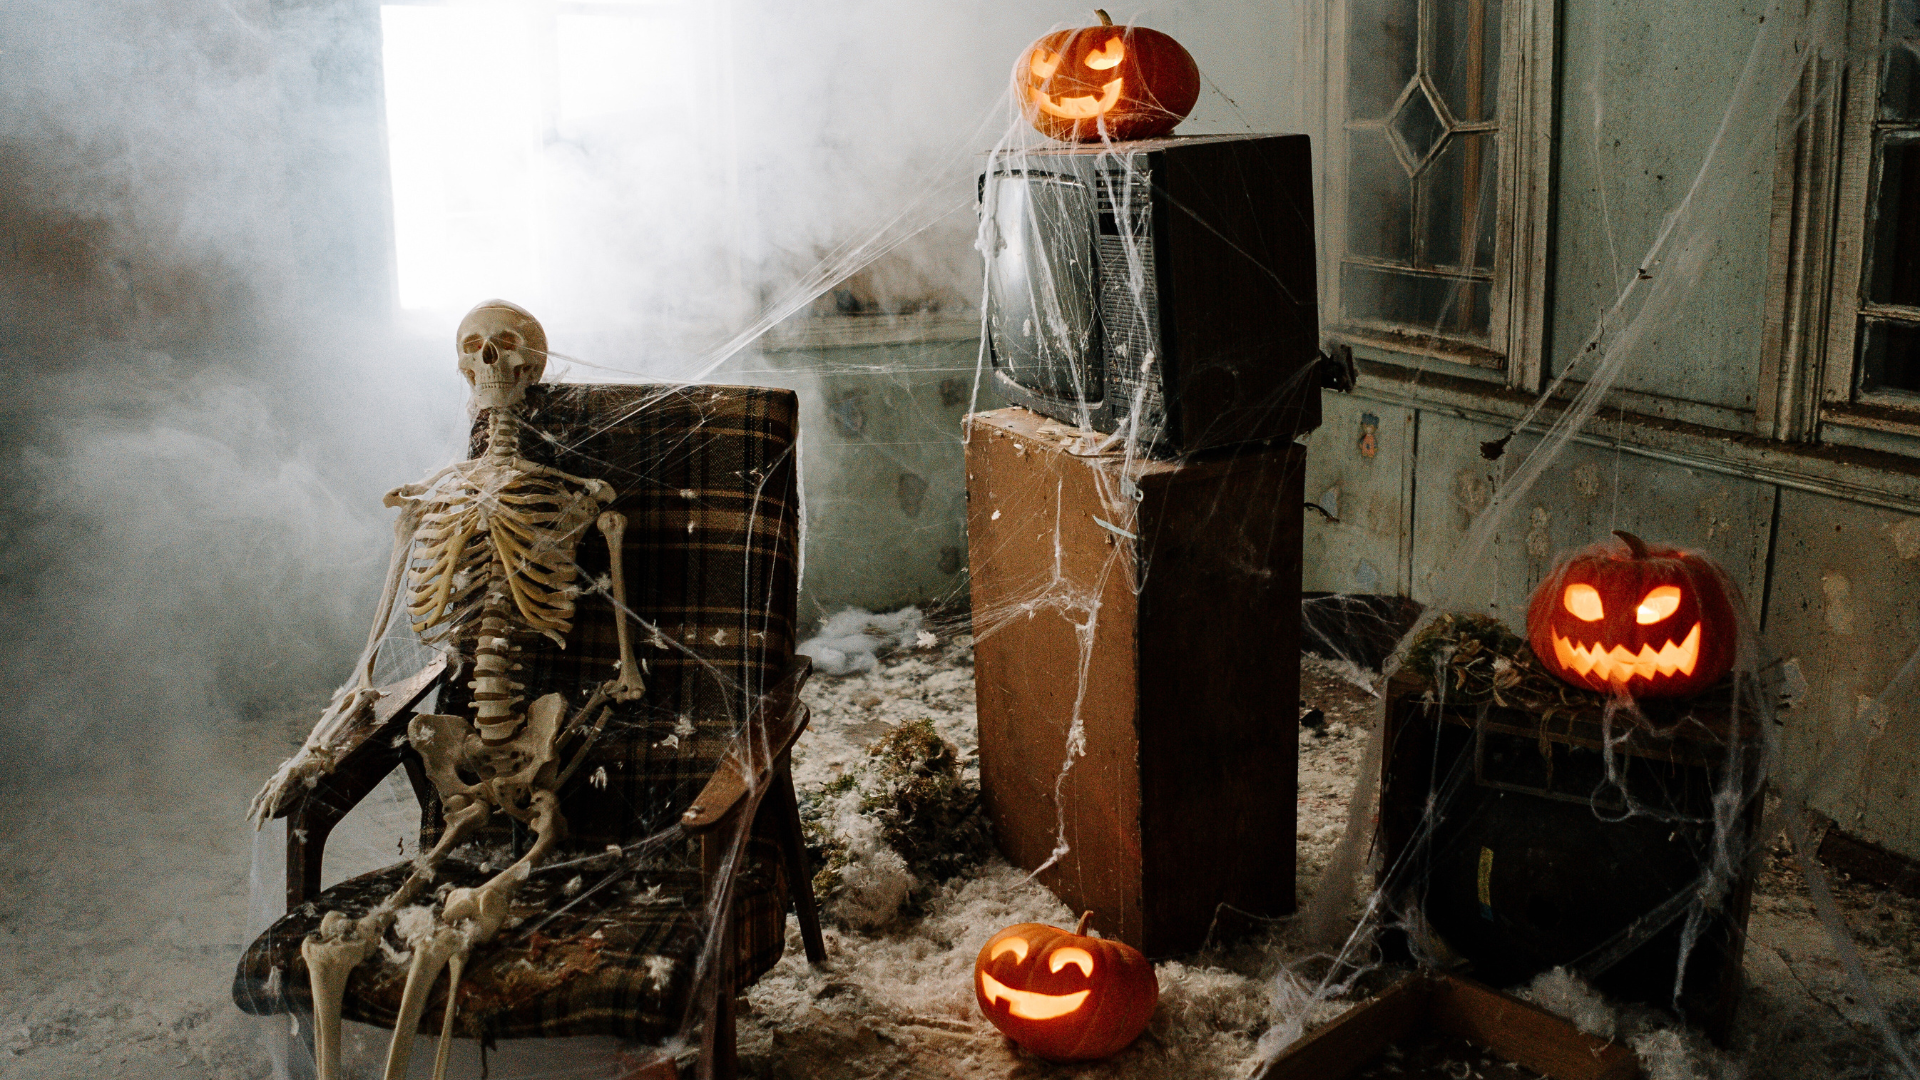 You will learn how to cut, paint, and glue the table leg and the cardboard shapes to create a realistic and spooky skeleton via the video below.